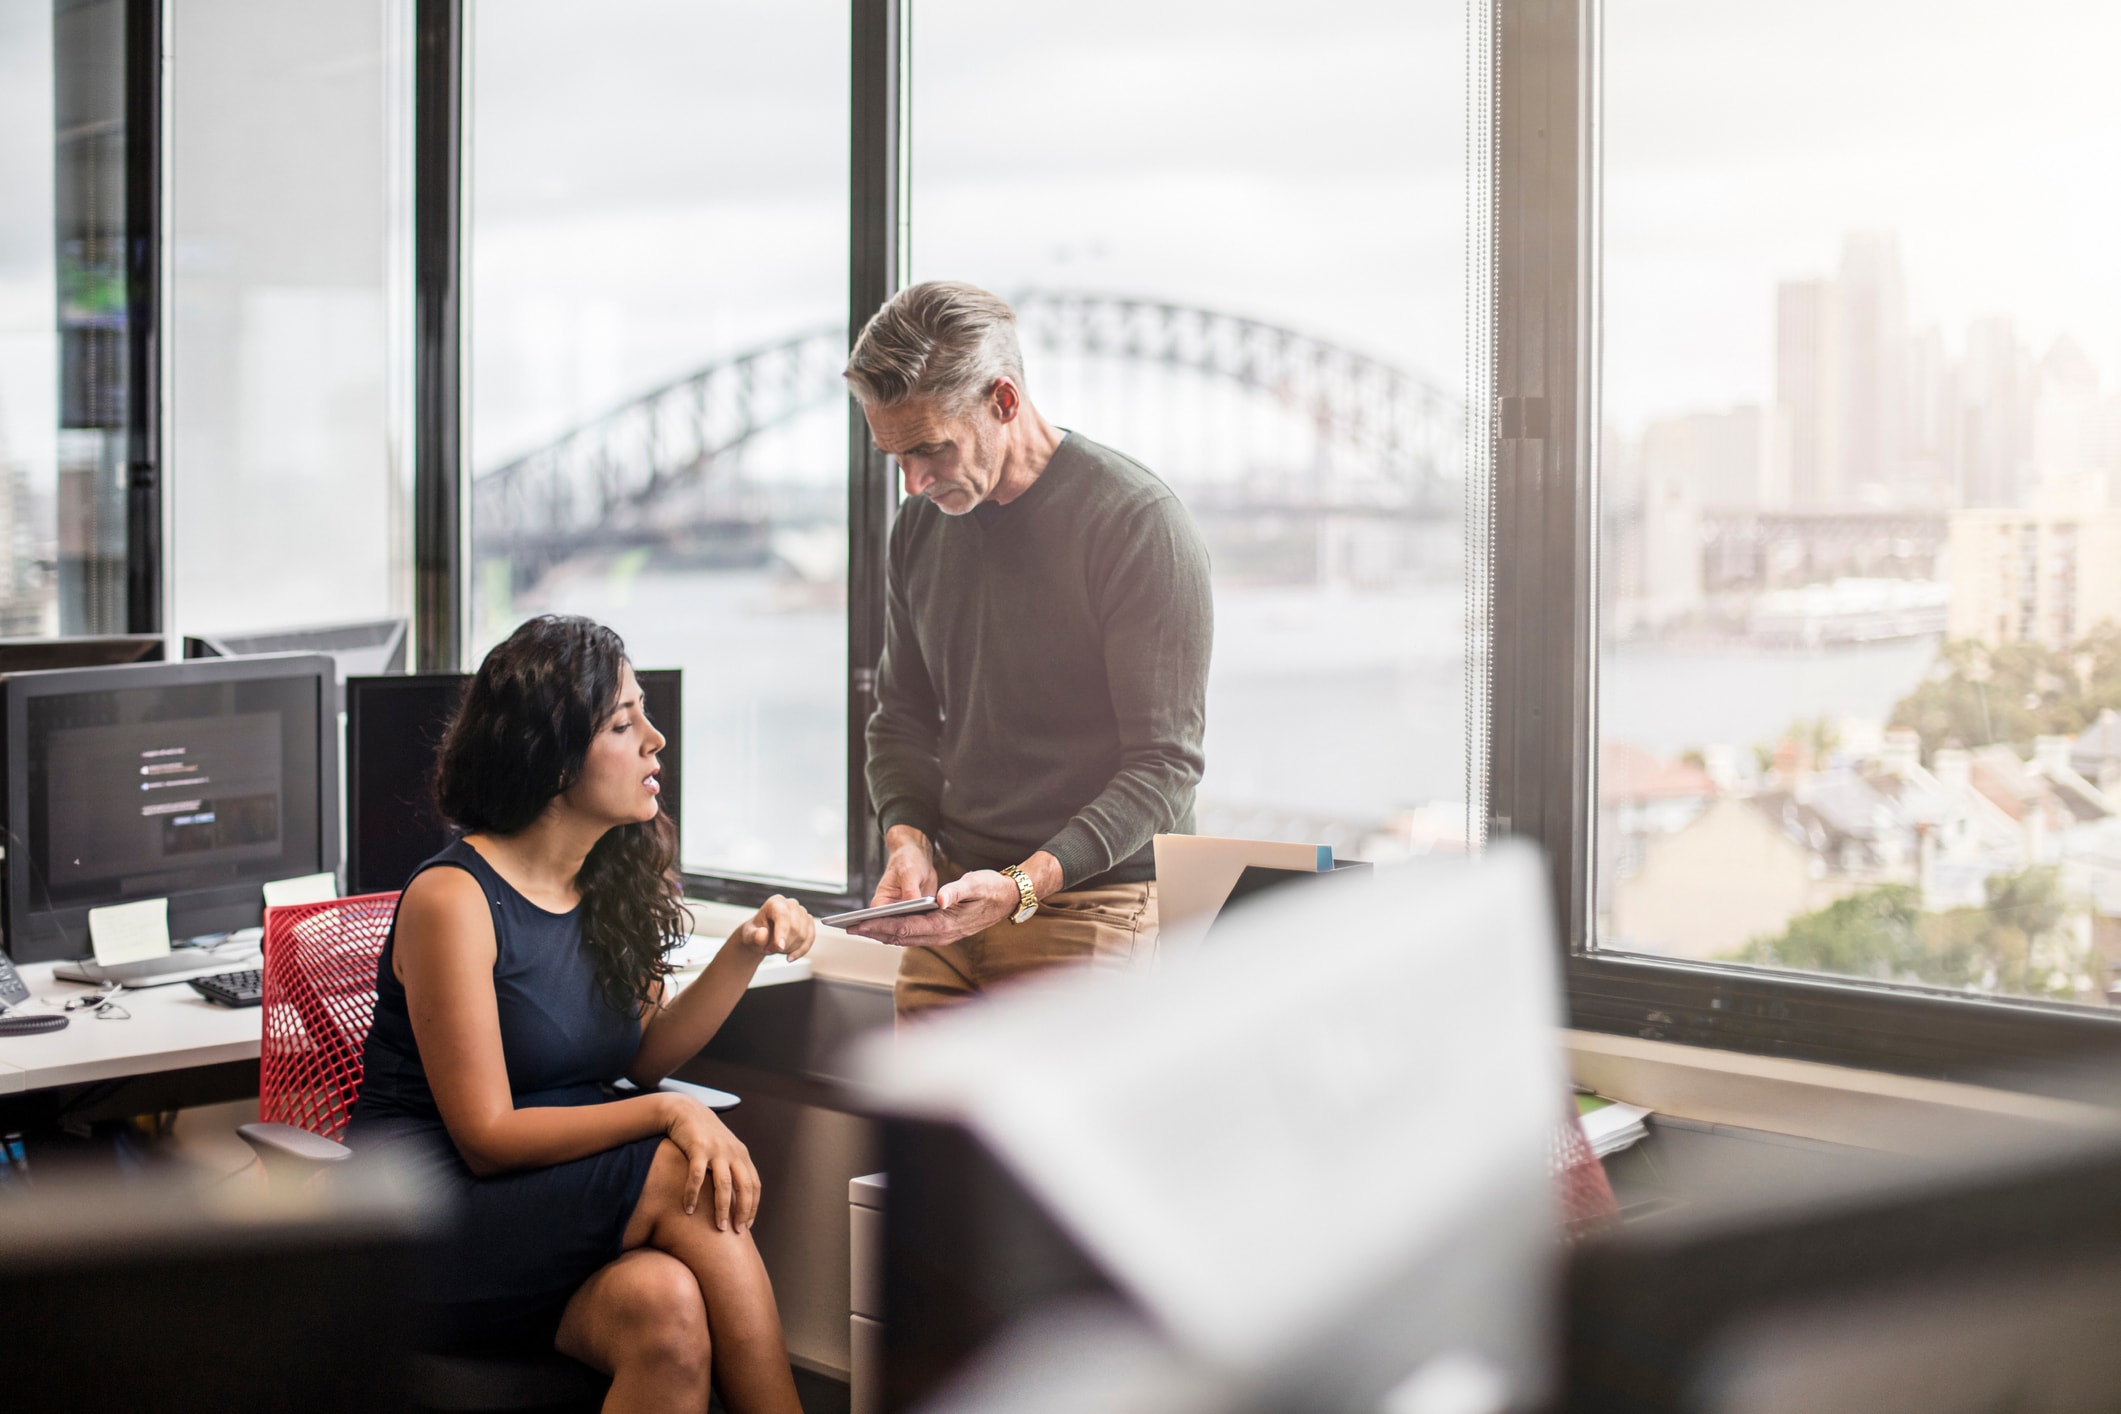 Two people in an office overlooking a city